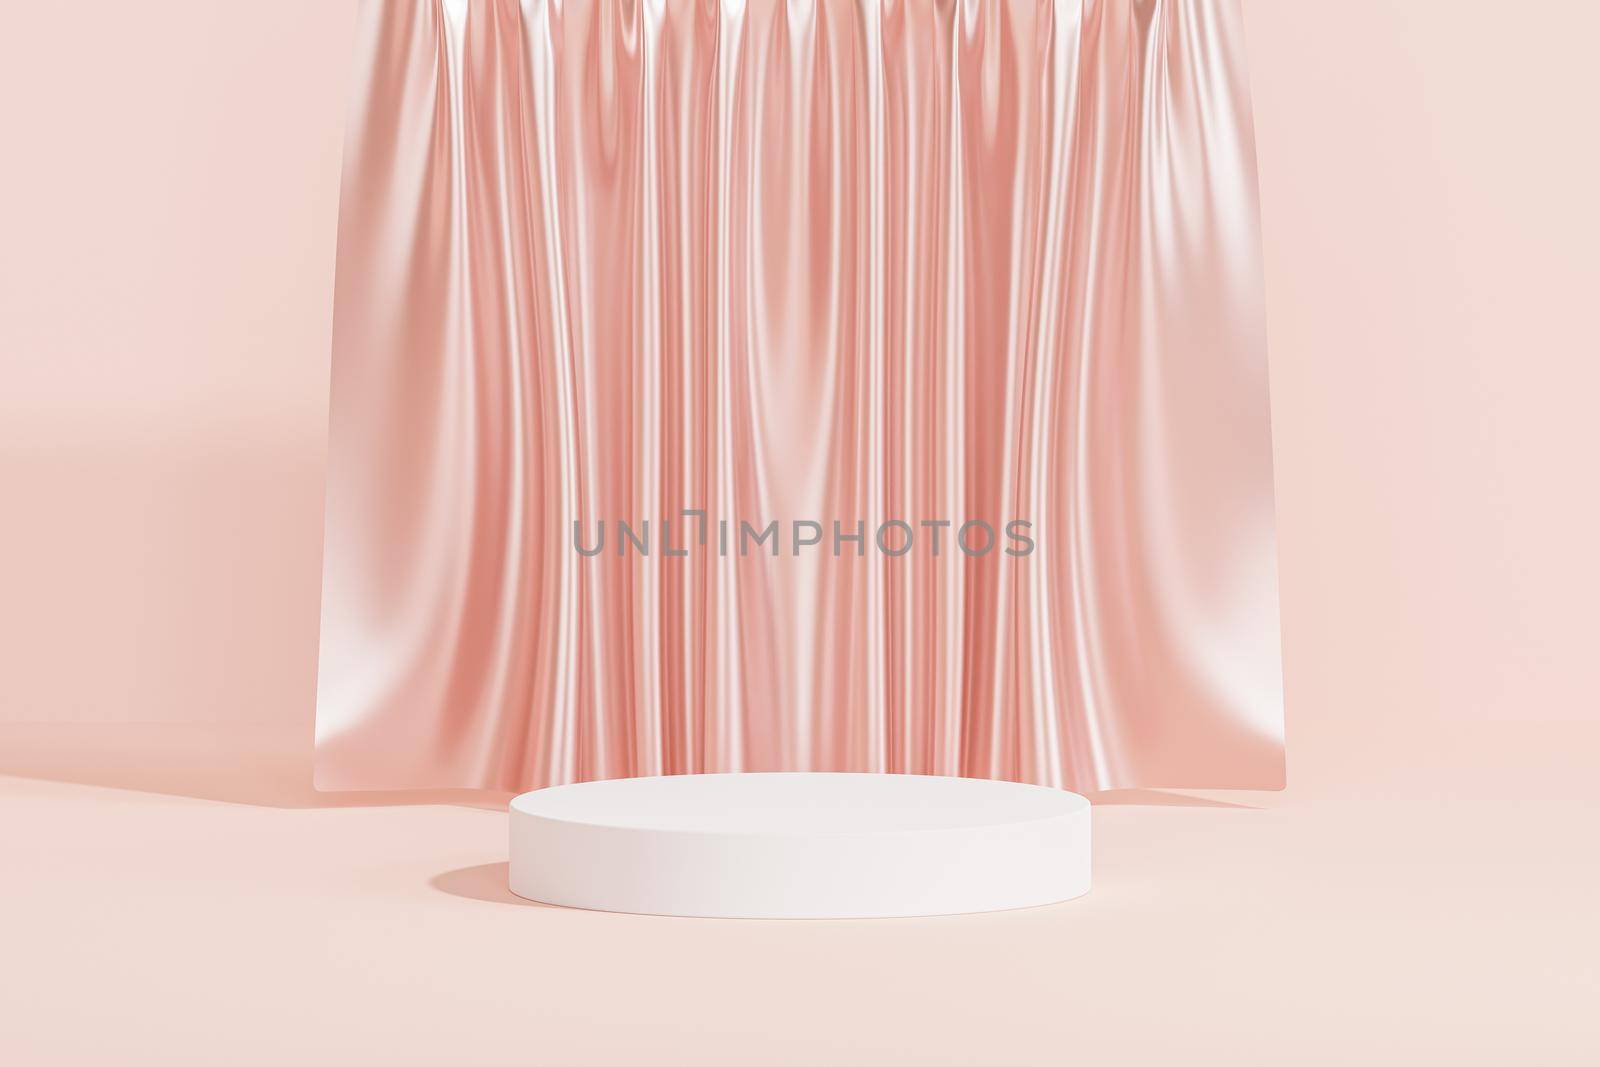 White podium or pedestal for products or advertising on pink background with curtains, 3d render by Frostroomhead